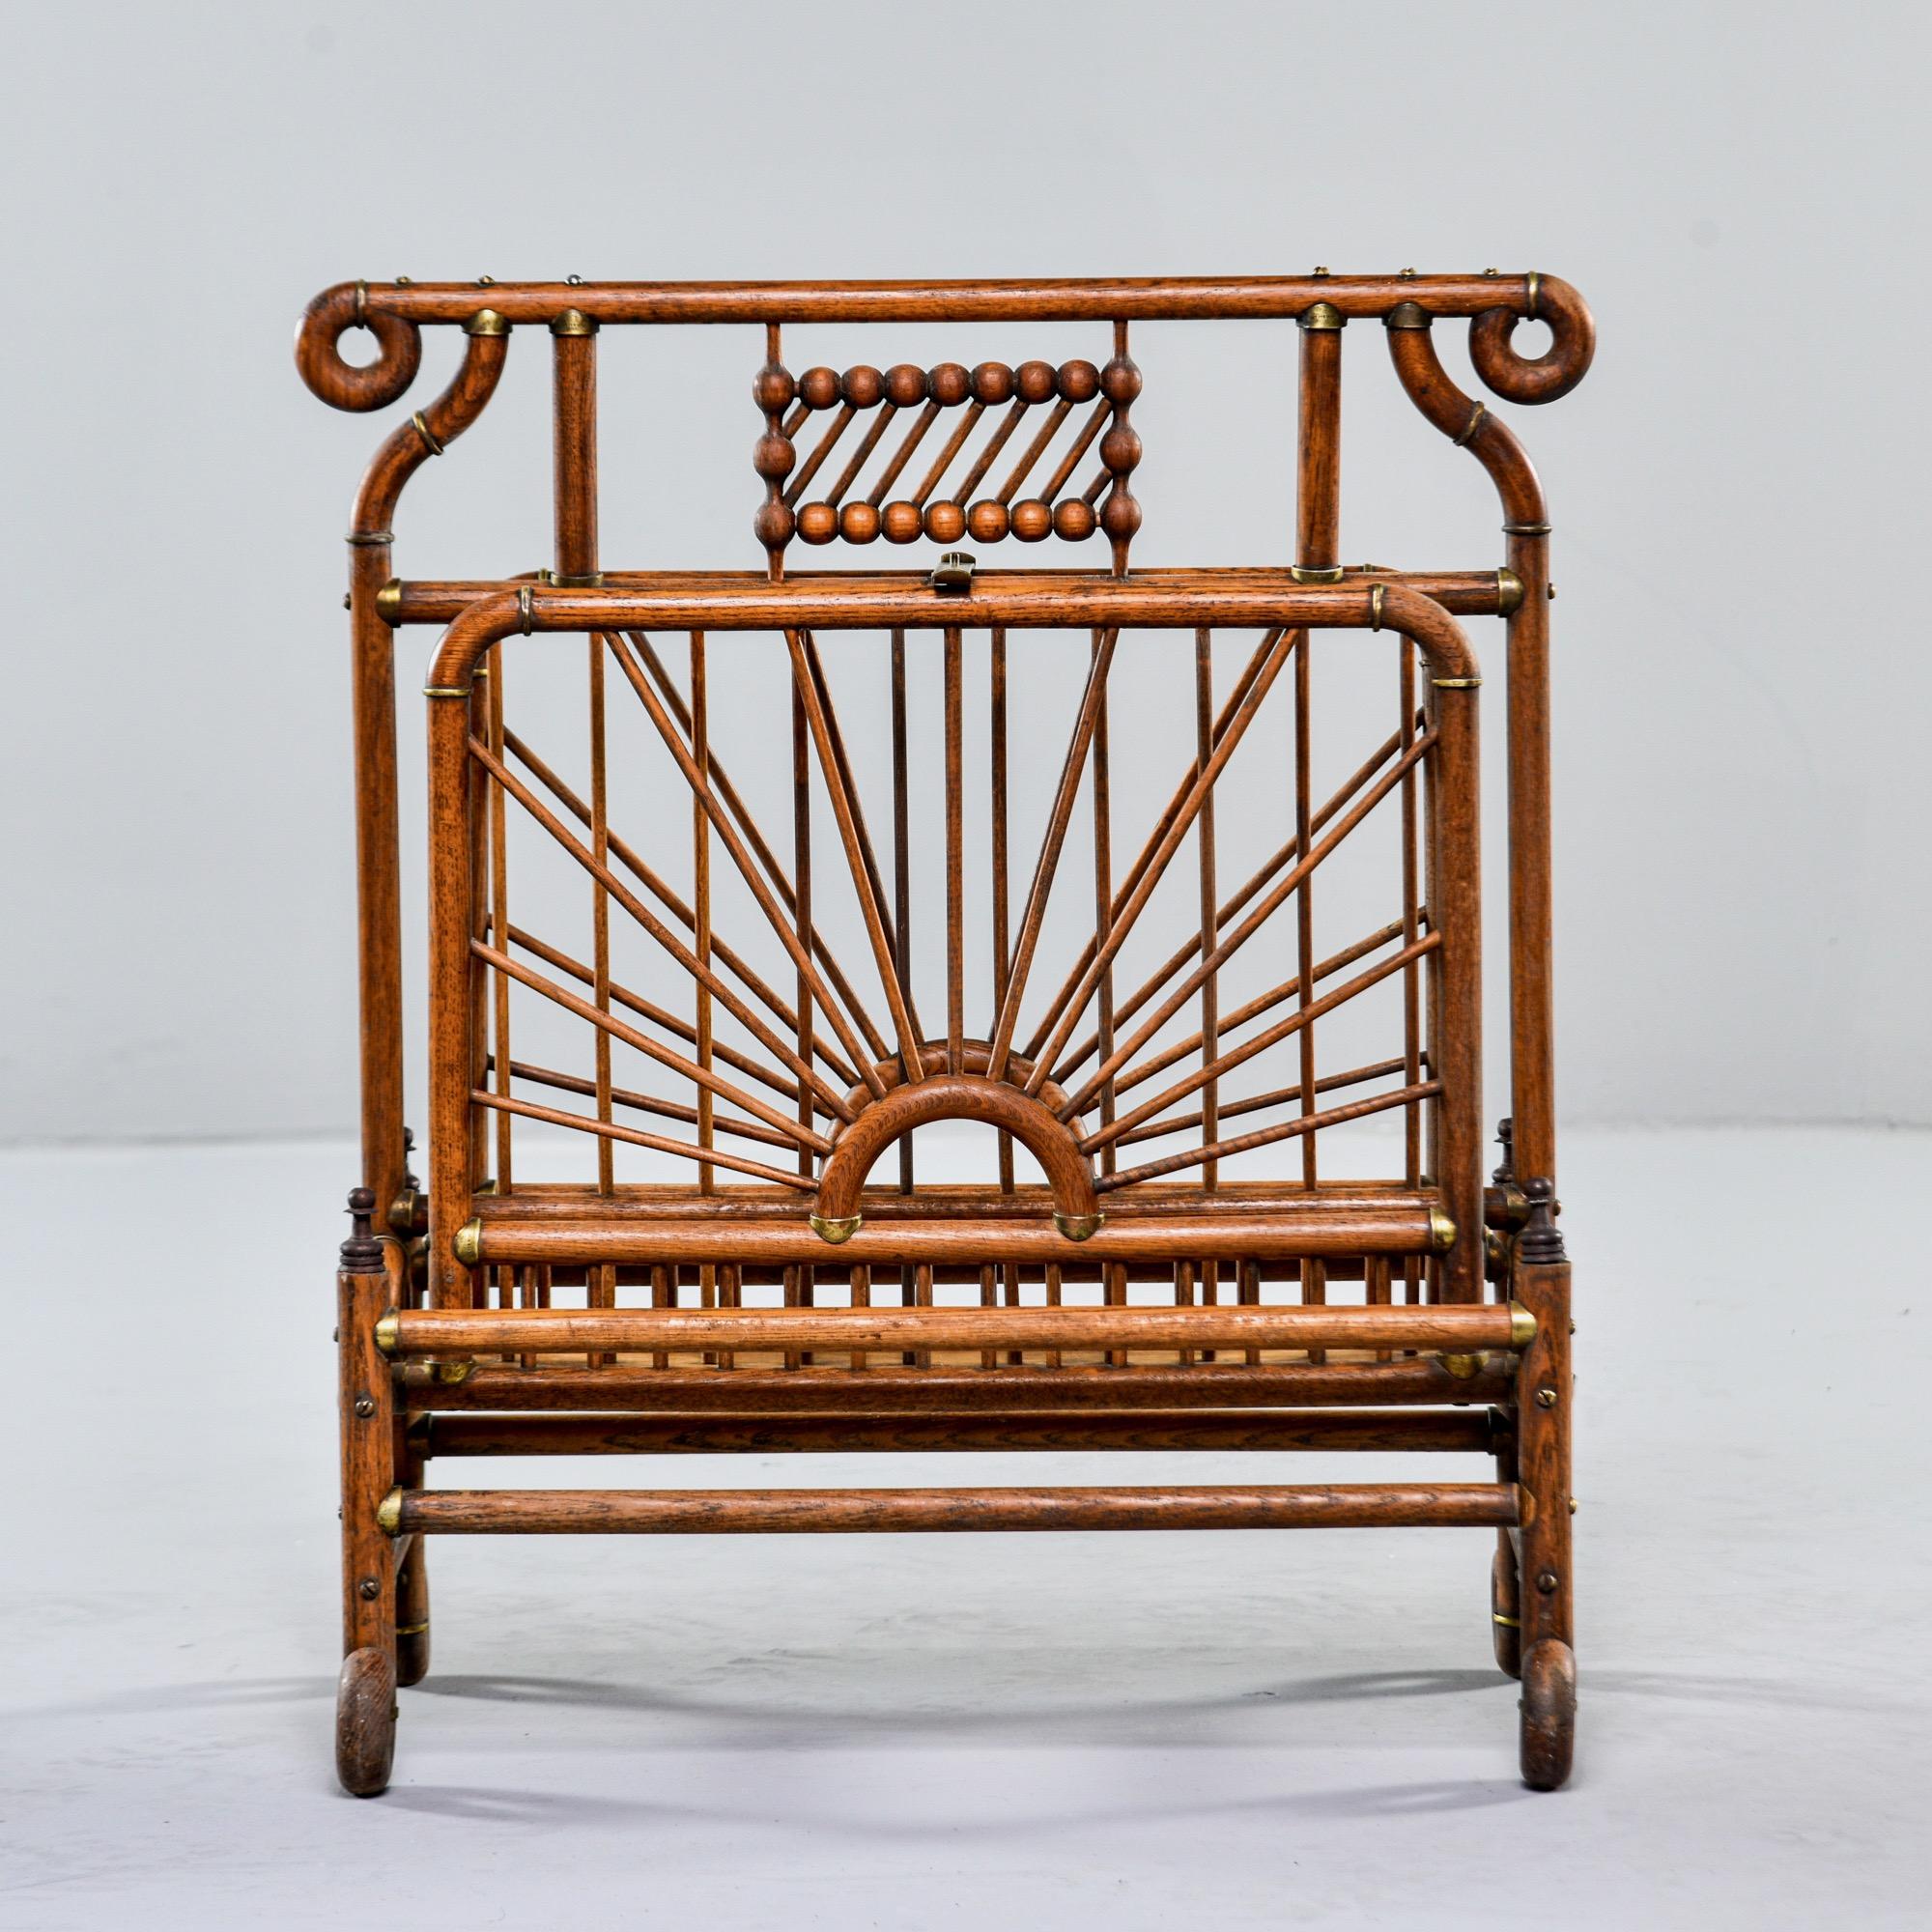 Late 19th century large bentwood and brass magazine rack. Two sections divided by tall center panel. Lots of decorative details - one of the brass fittings is stamped with Patent Feb 16 1892. Unknown maker. Found in the US.
